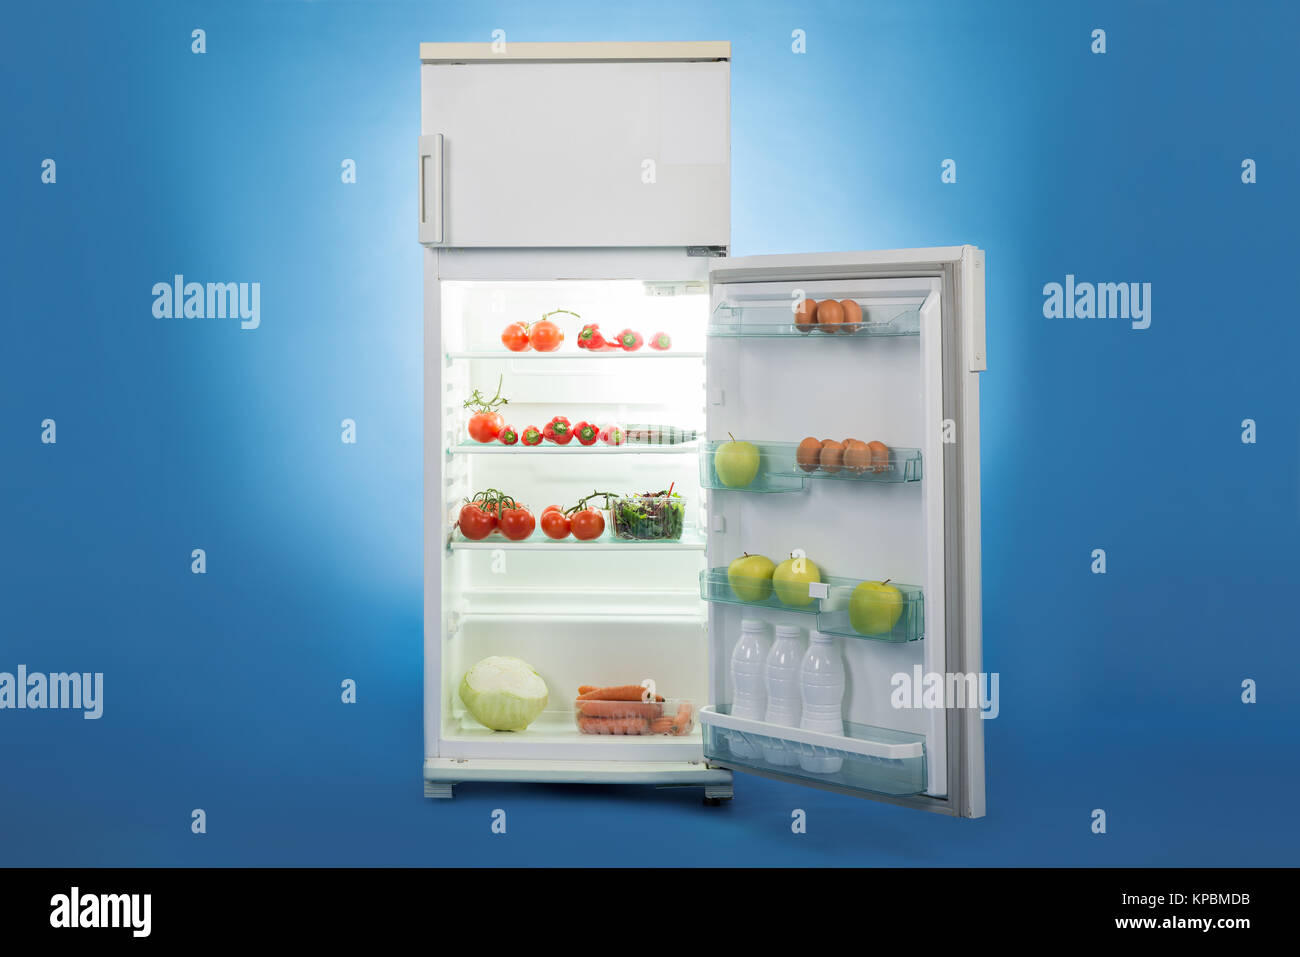 Open Refrigerator Full Of Healthy Food Stock Photo